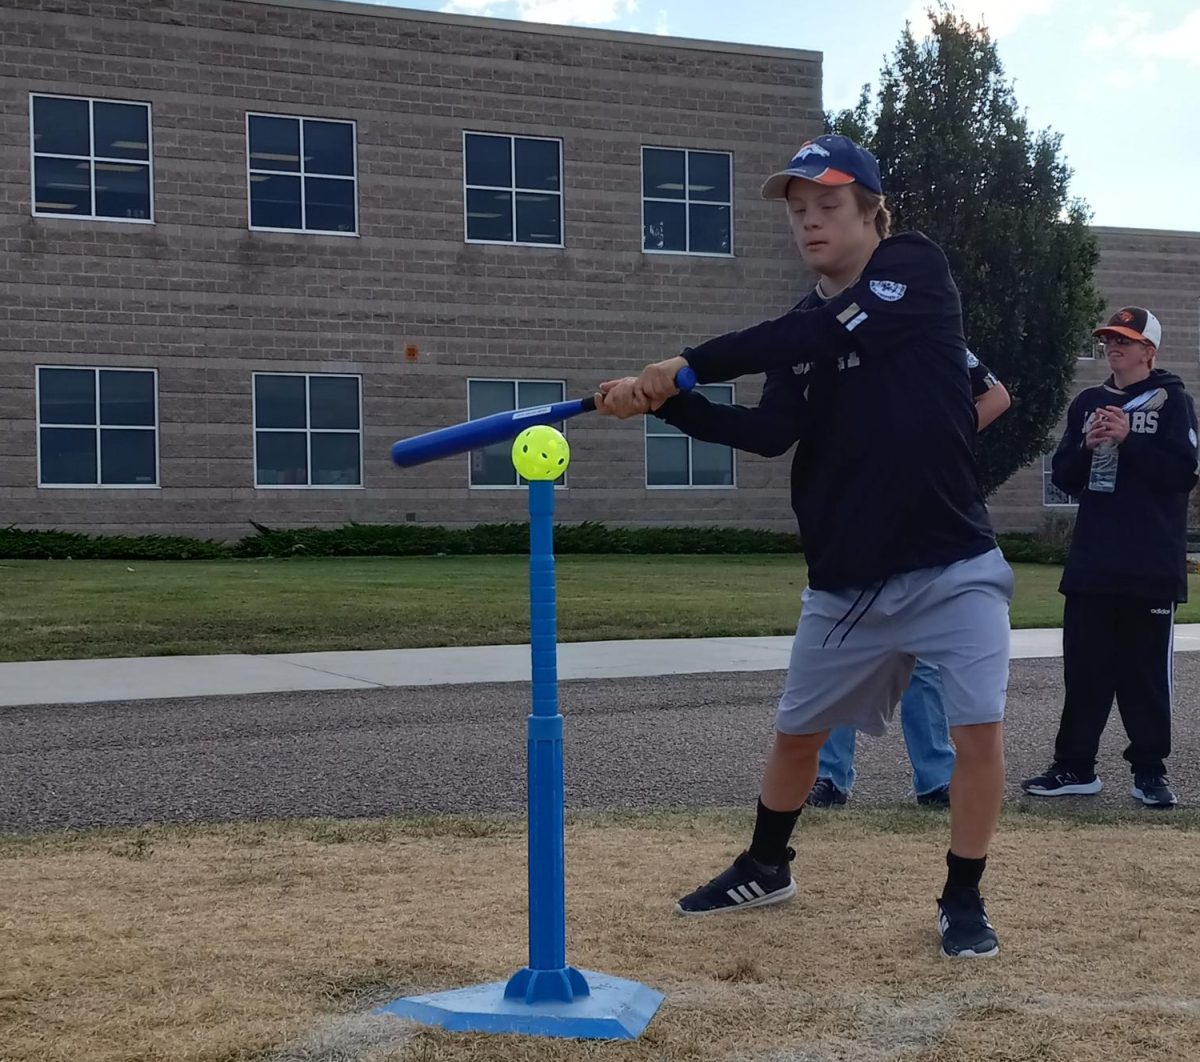 Jonathan Gunther ‘25 swings the bat at the Unified wiffle ball game at Chaparral High School Oct. 3. Wiffle ball allowed each athlete to play at a similar level to the others, even though some could hit the ball farther than others.